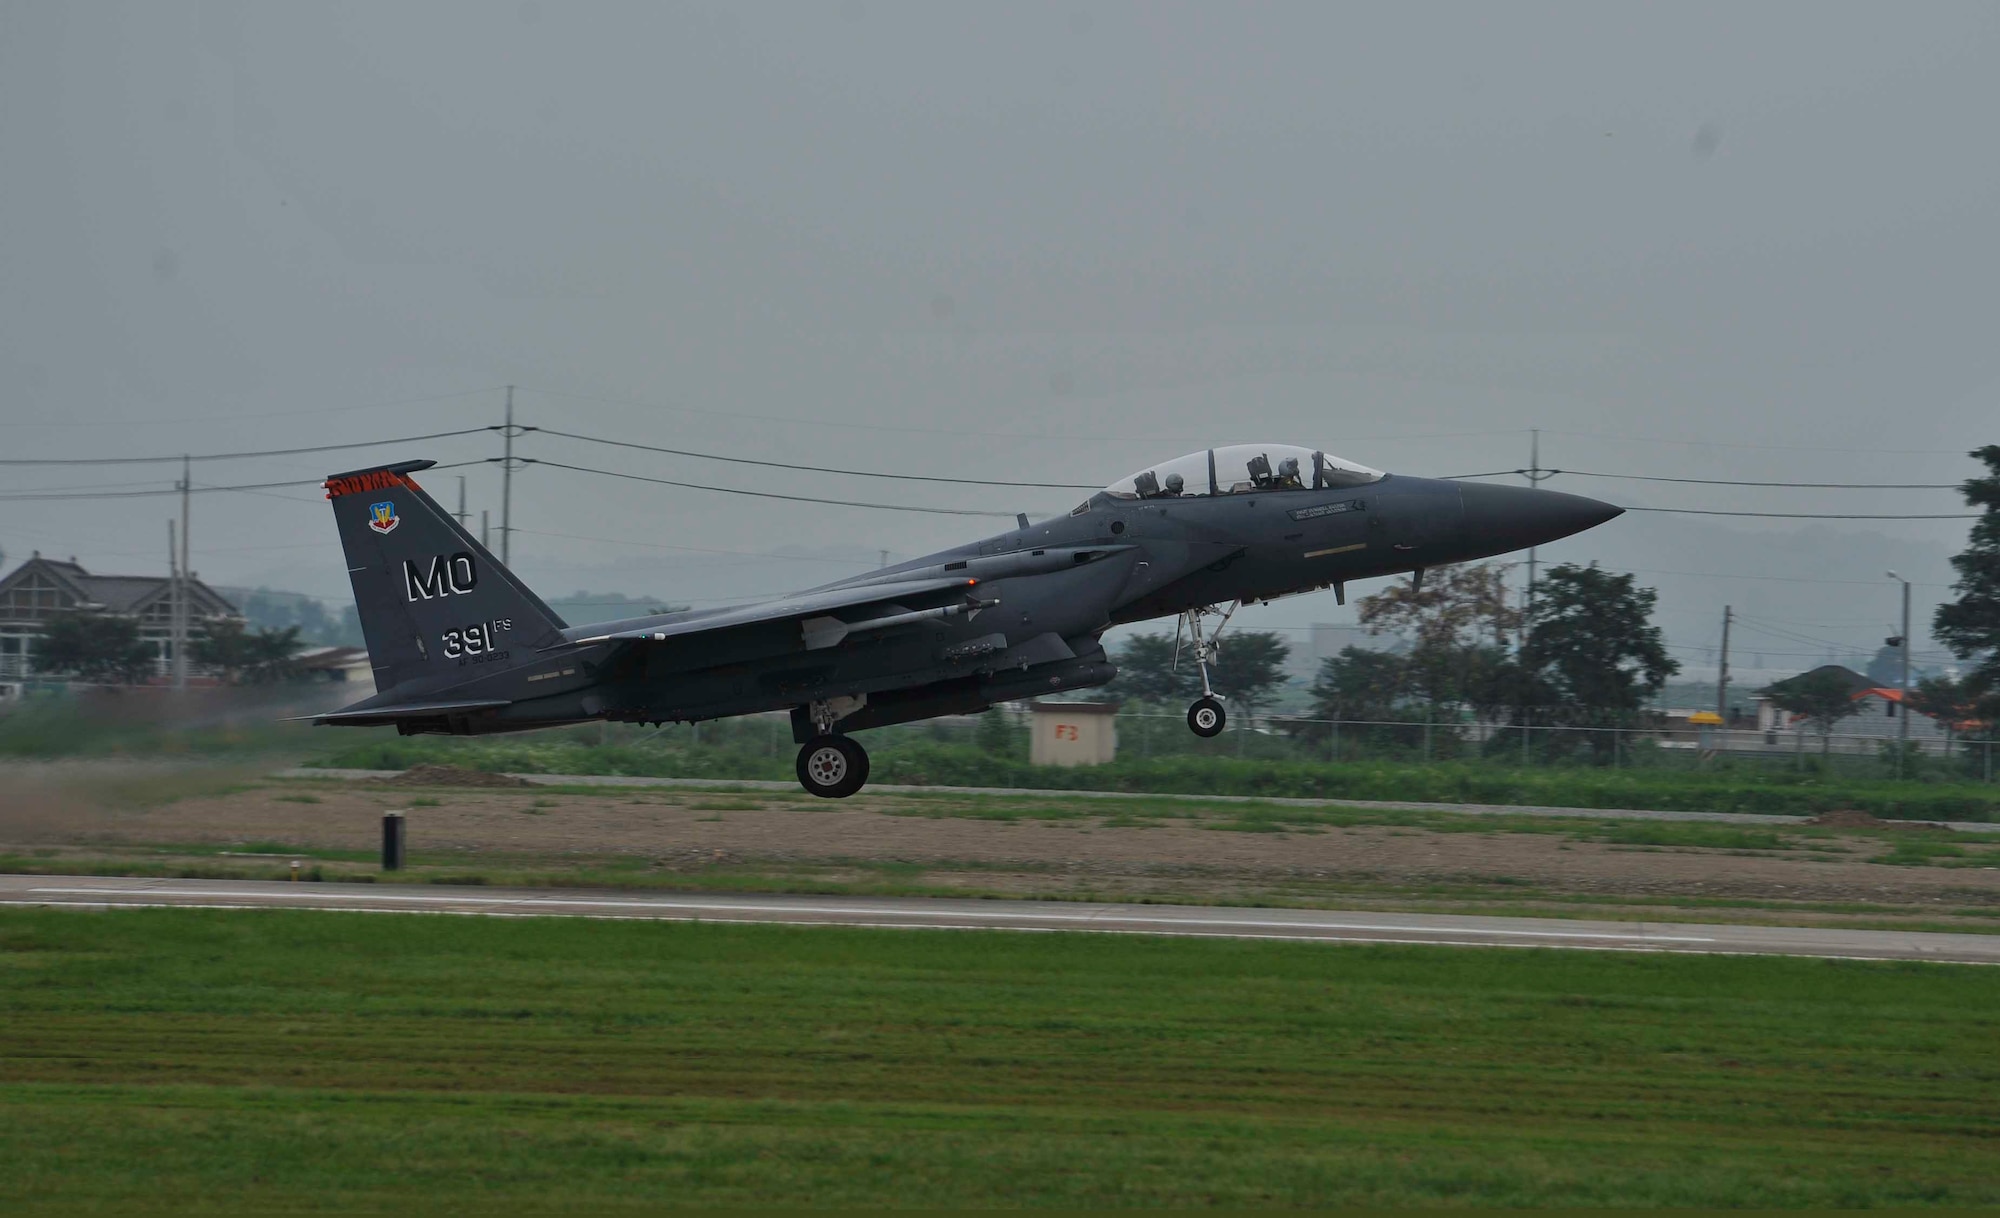 An F-15 Strike Eagle takes off to complete a sortie Aug. 15, 2014 on Osan Air Base, South Korea. The 391st Fighter Squadron sent 12 F-15s to Osan AB for a temporary duty assignment as part of a theater support package. (U.S. Air Force photo/Senior Airman David Owsianka)